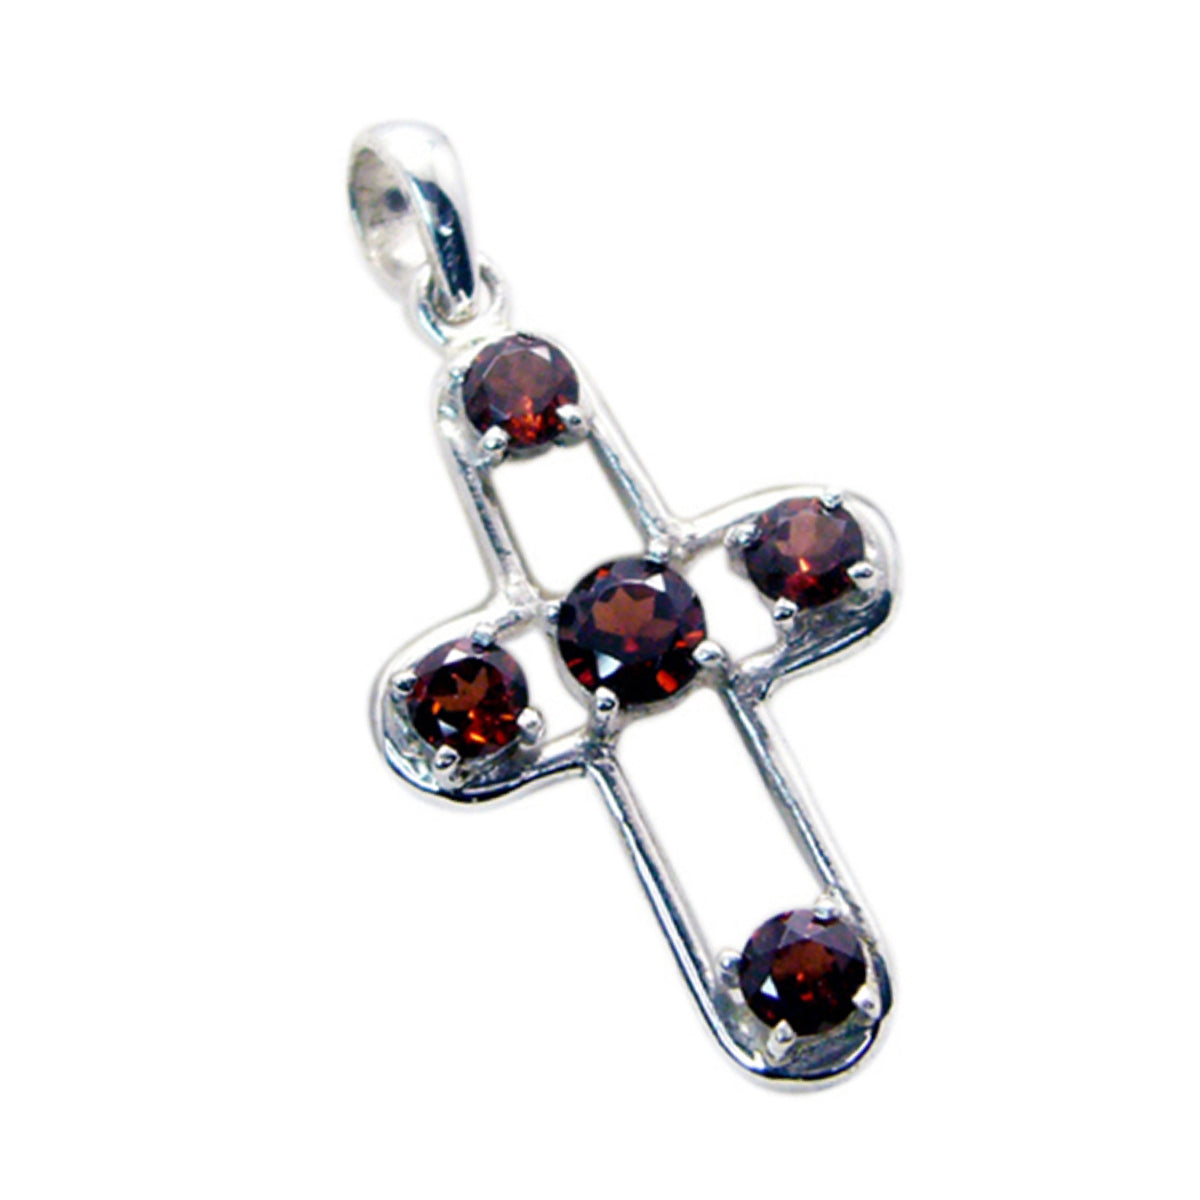 Riyo Pleasing Gems Round Faceted Red Garnet Solid Silver Pendant Gift For Good Friday